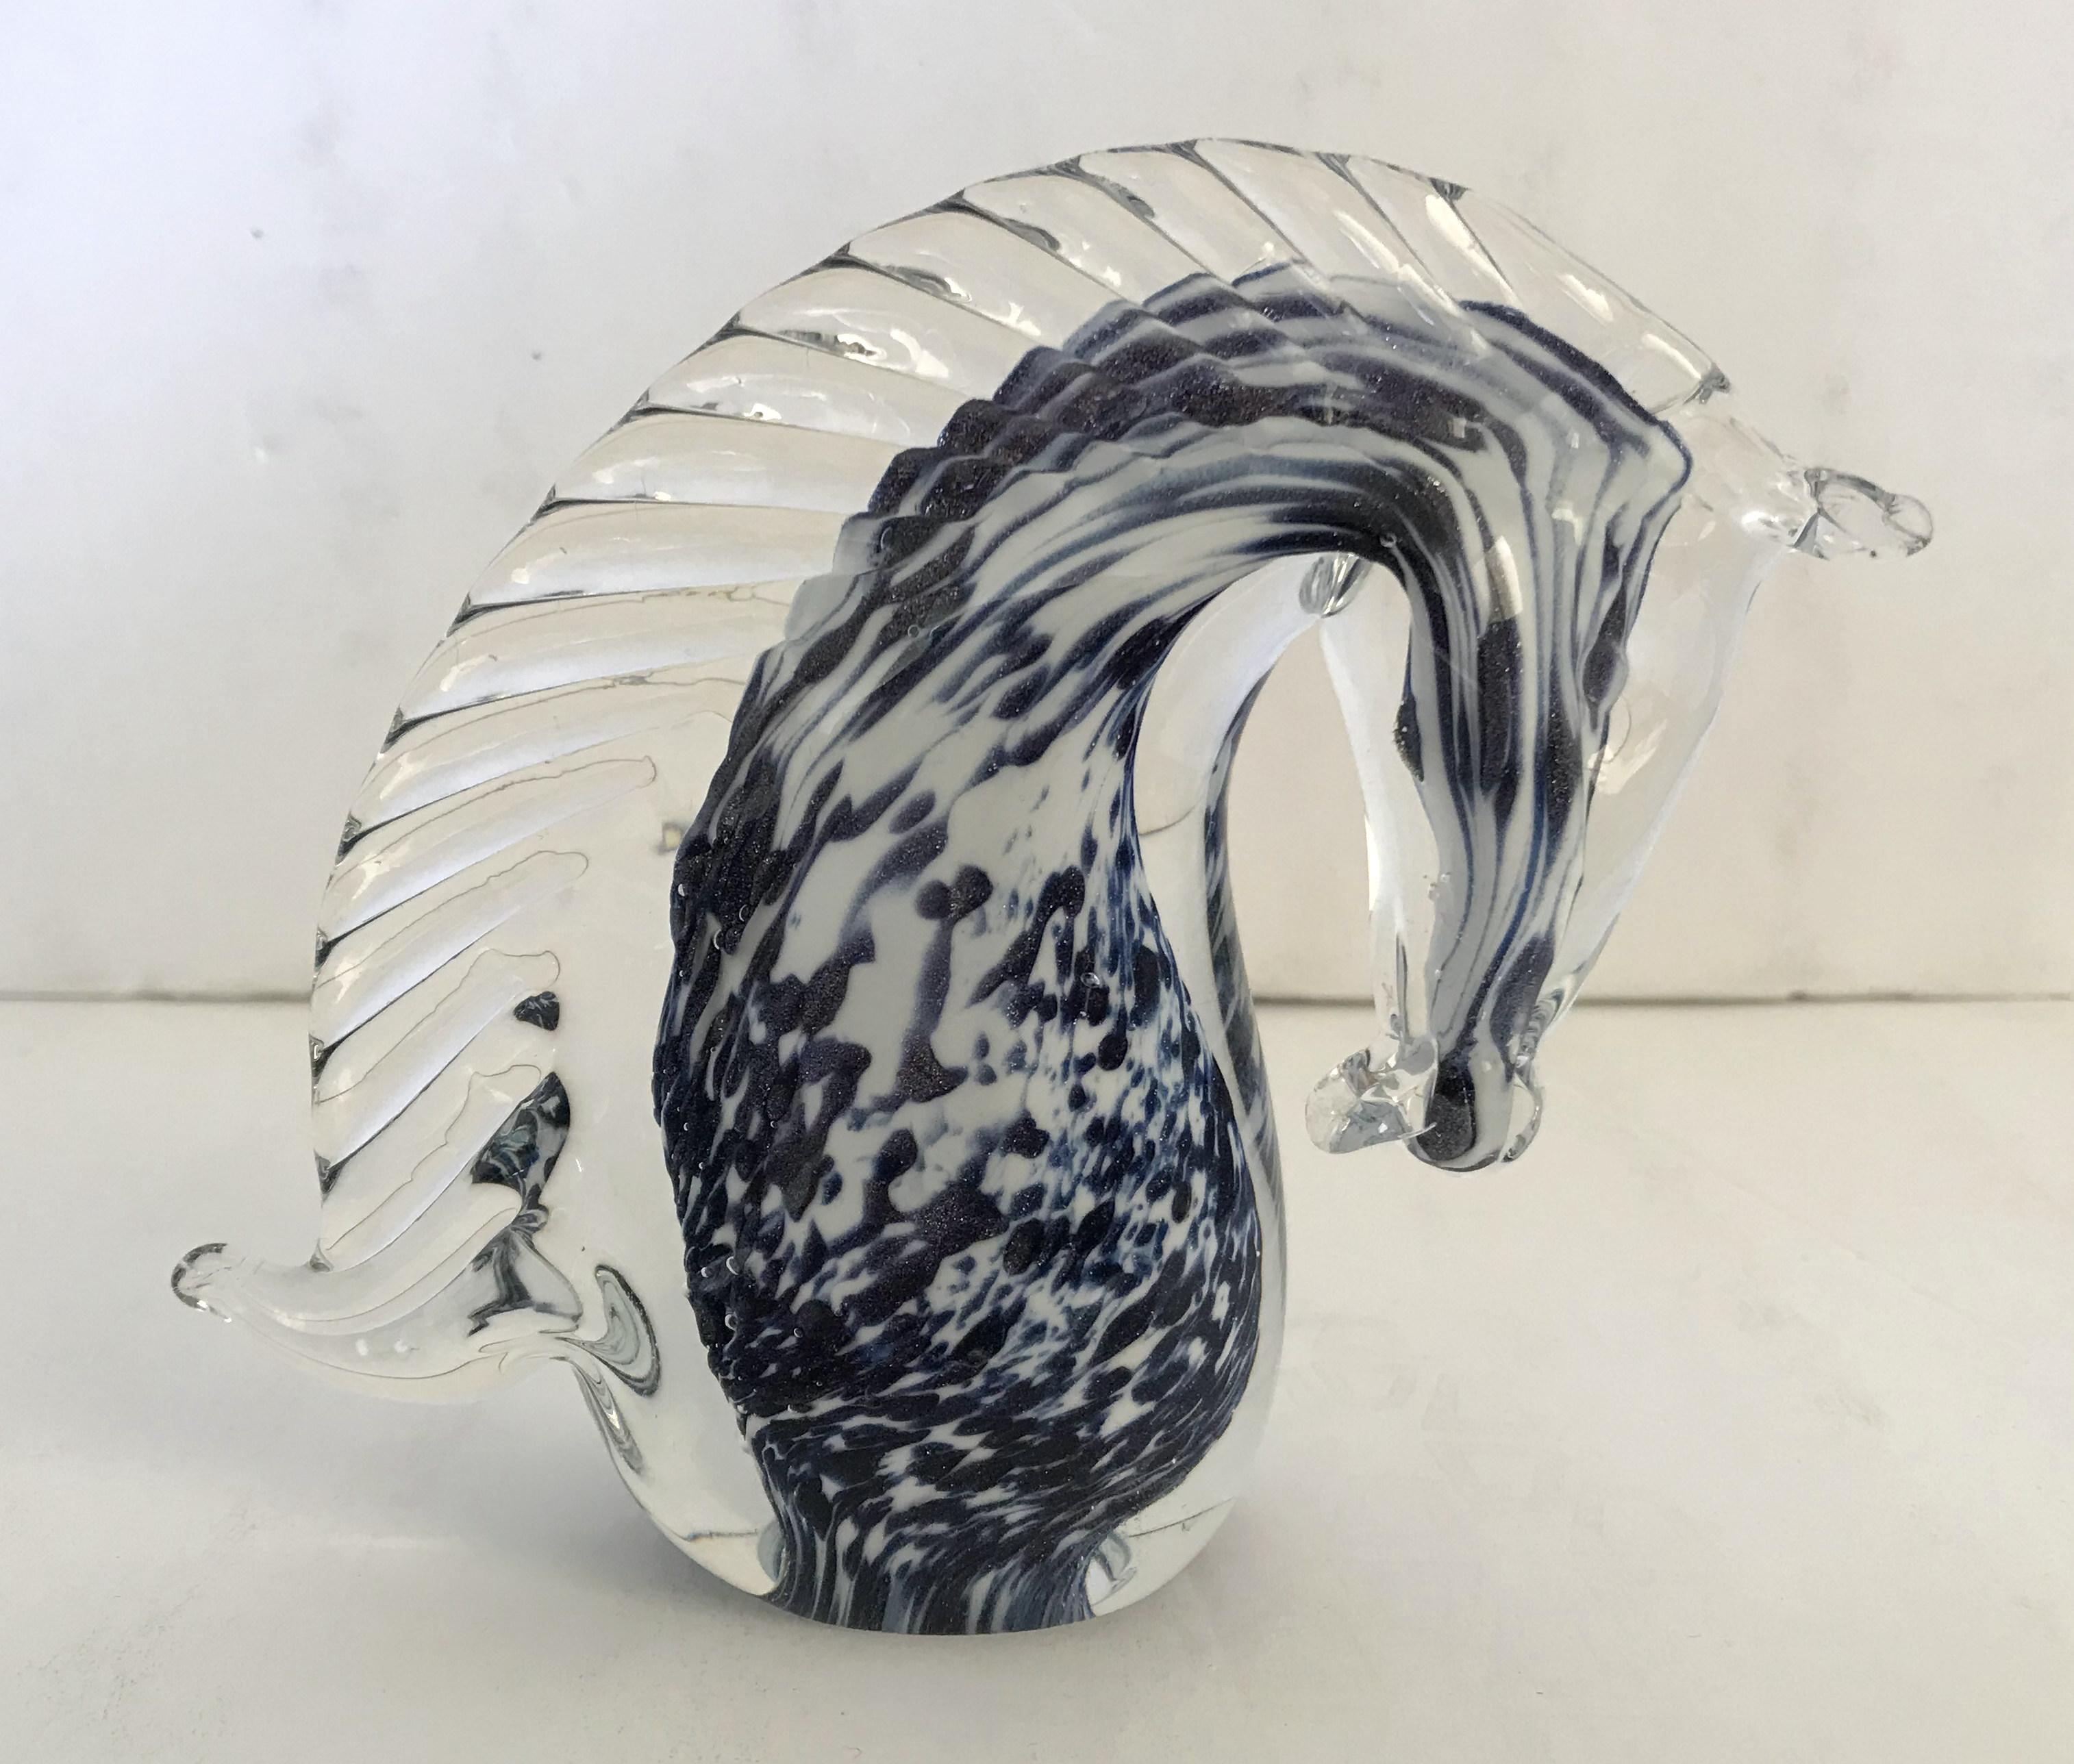 Vintage hand blown Murano glass horse sculpture / Made in Italy, circa 1980s
Original sticker on the body
Measures: Height 4.5 inches / width 5.5 inches / depth 1 inch
1 in stock in Palm Springs ON 50% OFF SALE for $299 !!
Order Reference #: